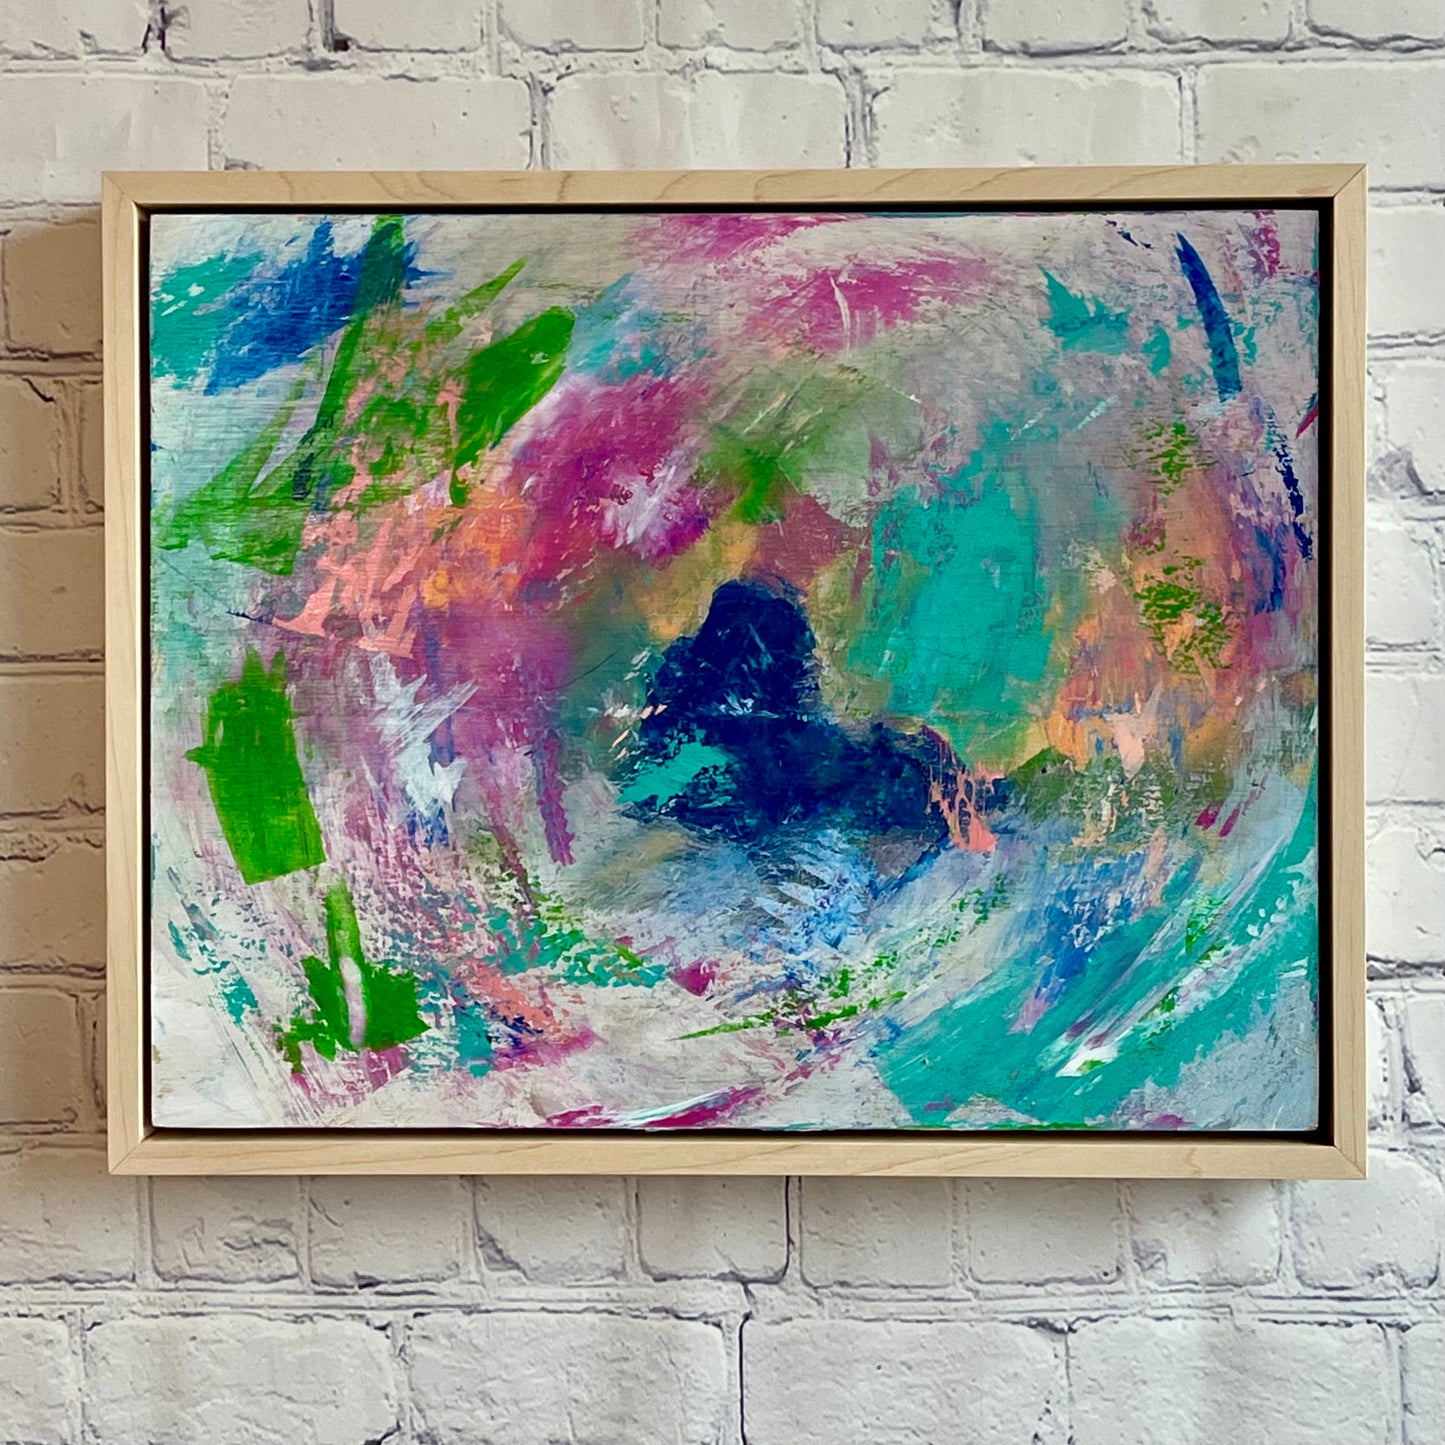 Roll With the Punches | 11"x14" Framed Original Abstract